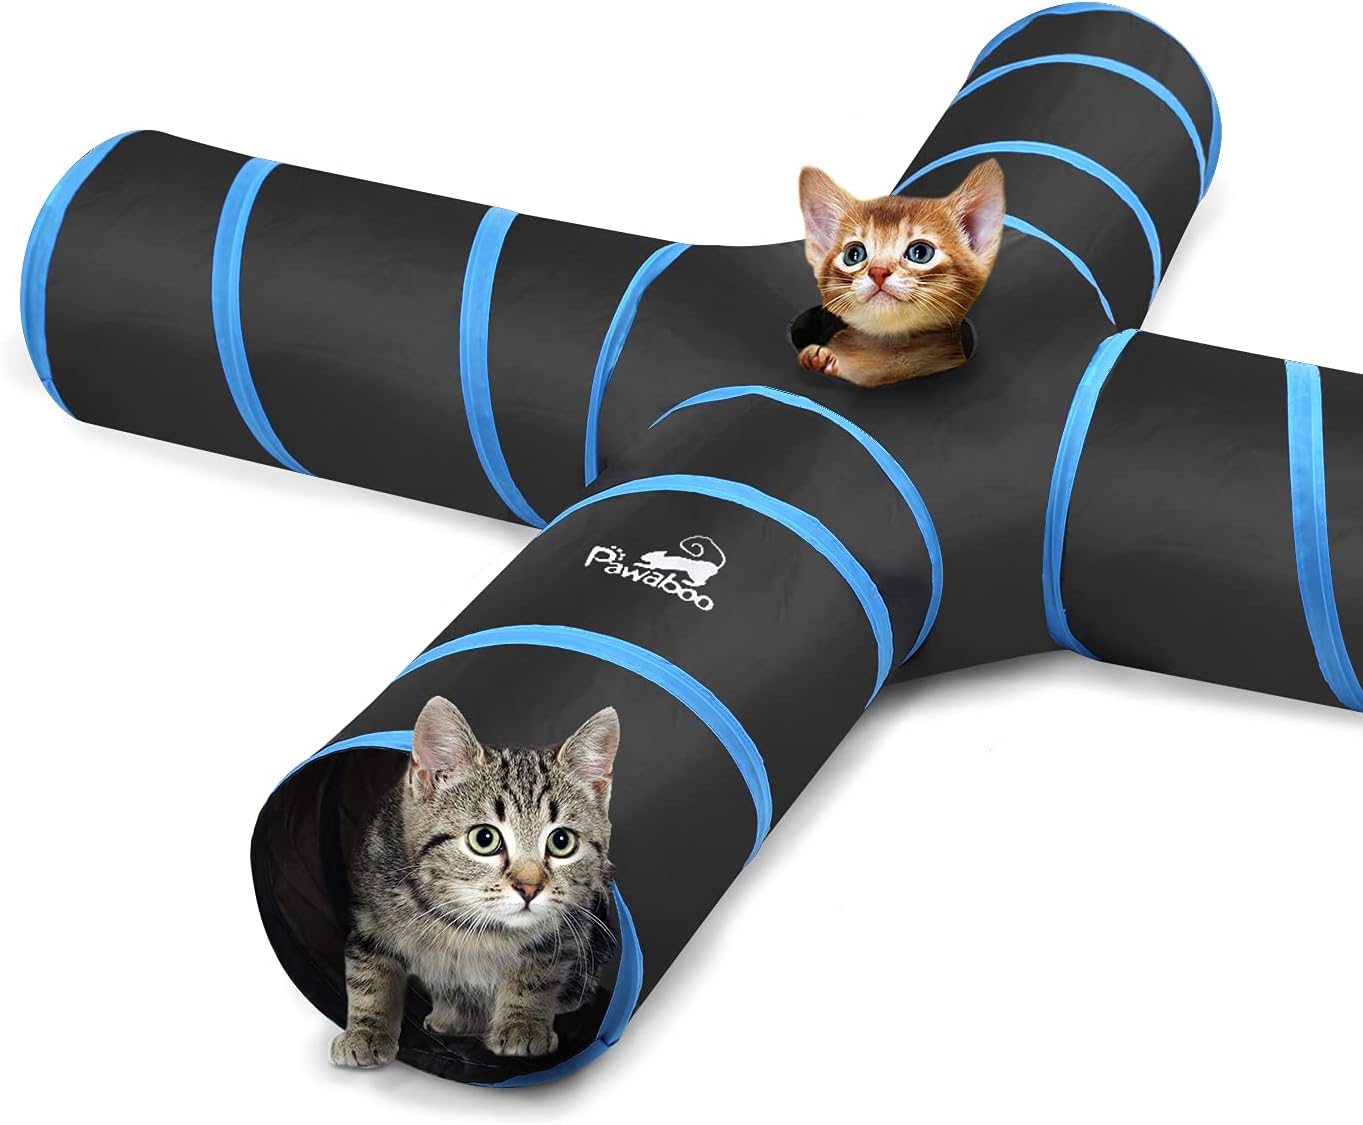 Cat Toys, Cat Tunnel Tube 3-Way Tunnels Extensible Collapsible Cat Play Tent Interactive Toy Maze Cat House Bed with Balls and Bells for Cat Kitten Kitty Rabbit Small Animal